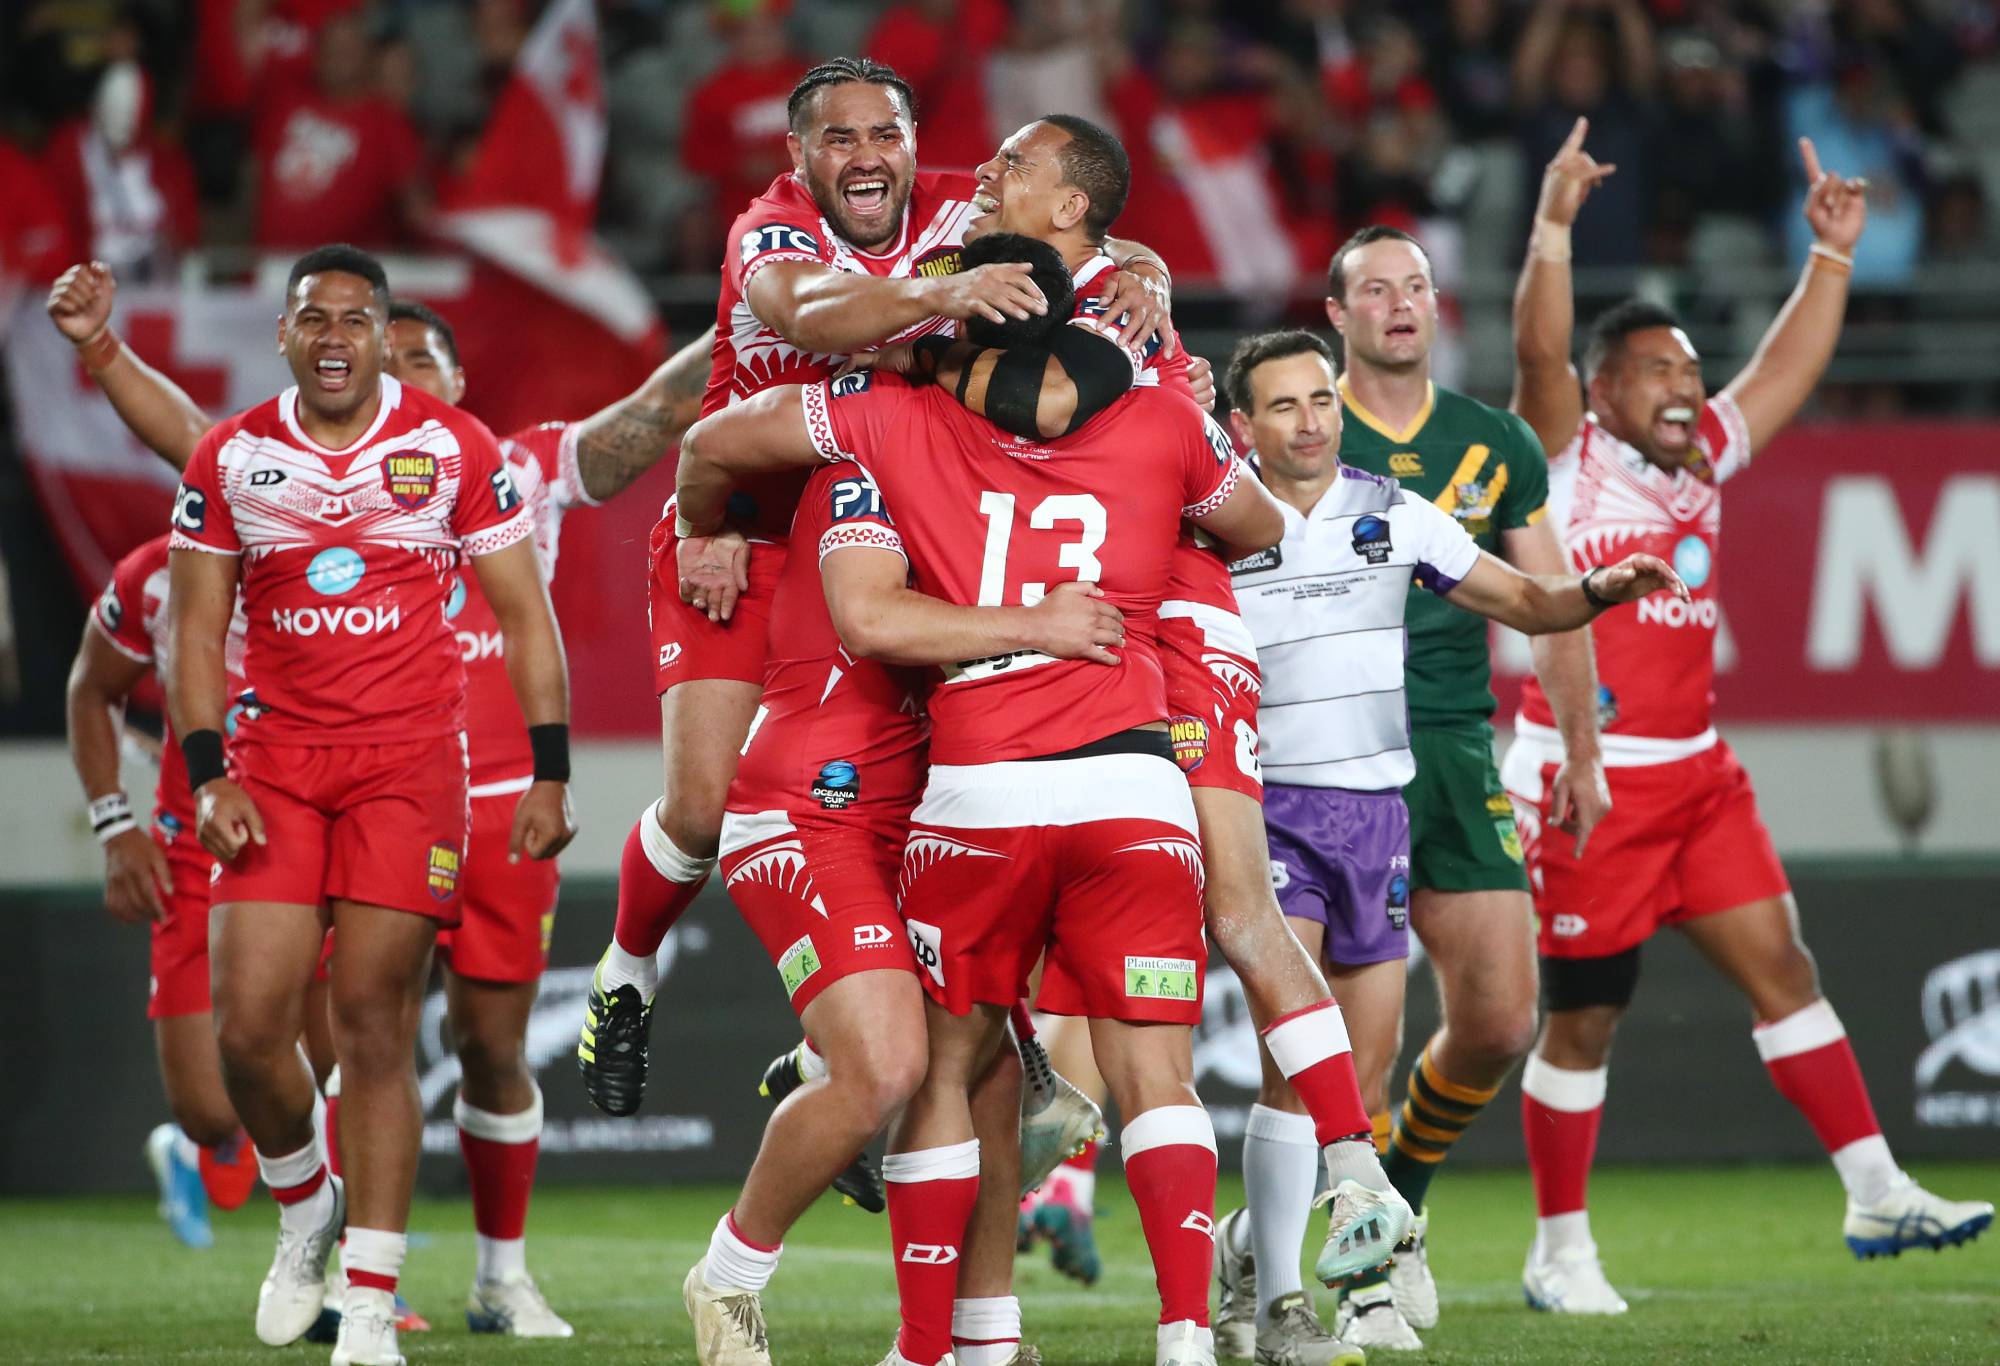 AUCKLAND, NEW ZEALAND - NOVEMBER 02: Tonga celebrate their win over Australia during the Rugby League International Test match between the Australia Kangaroos and Tonga at Eden Park on November 02, 2019 in Auckland, New Zealand. (Photo by Fiona Goodall/Getty Images)